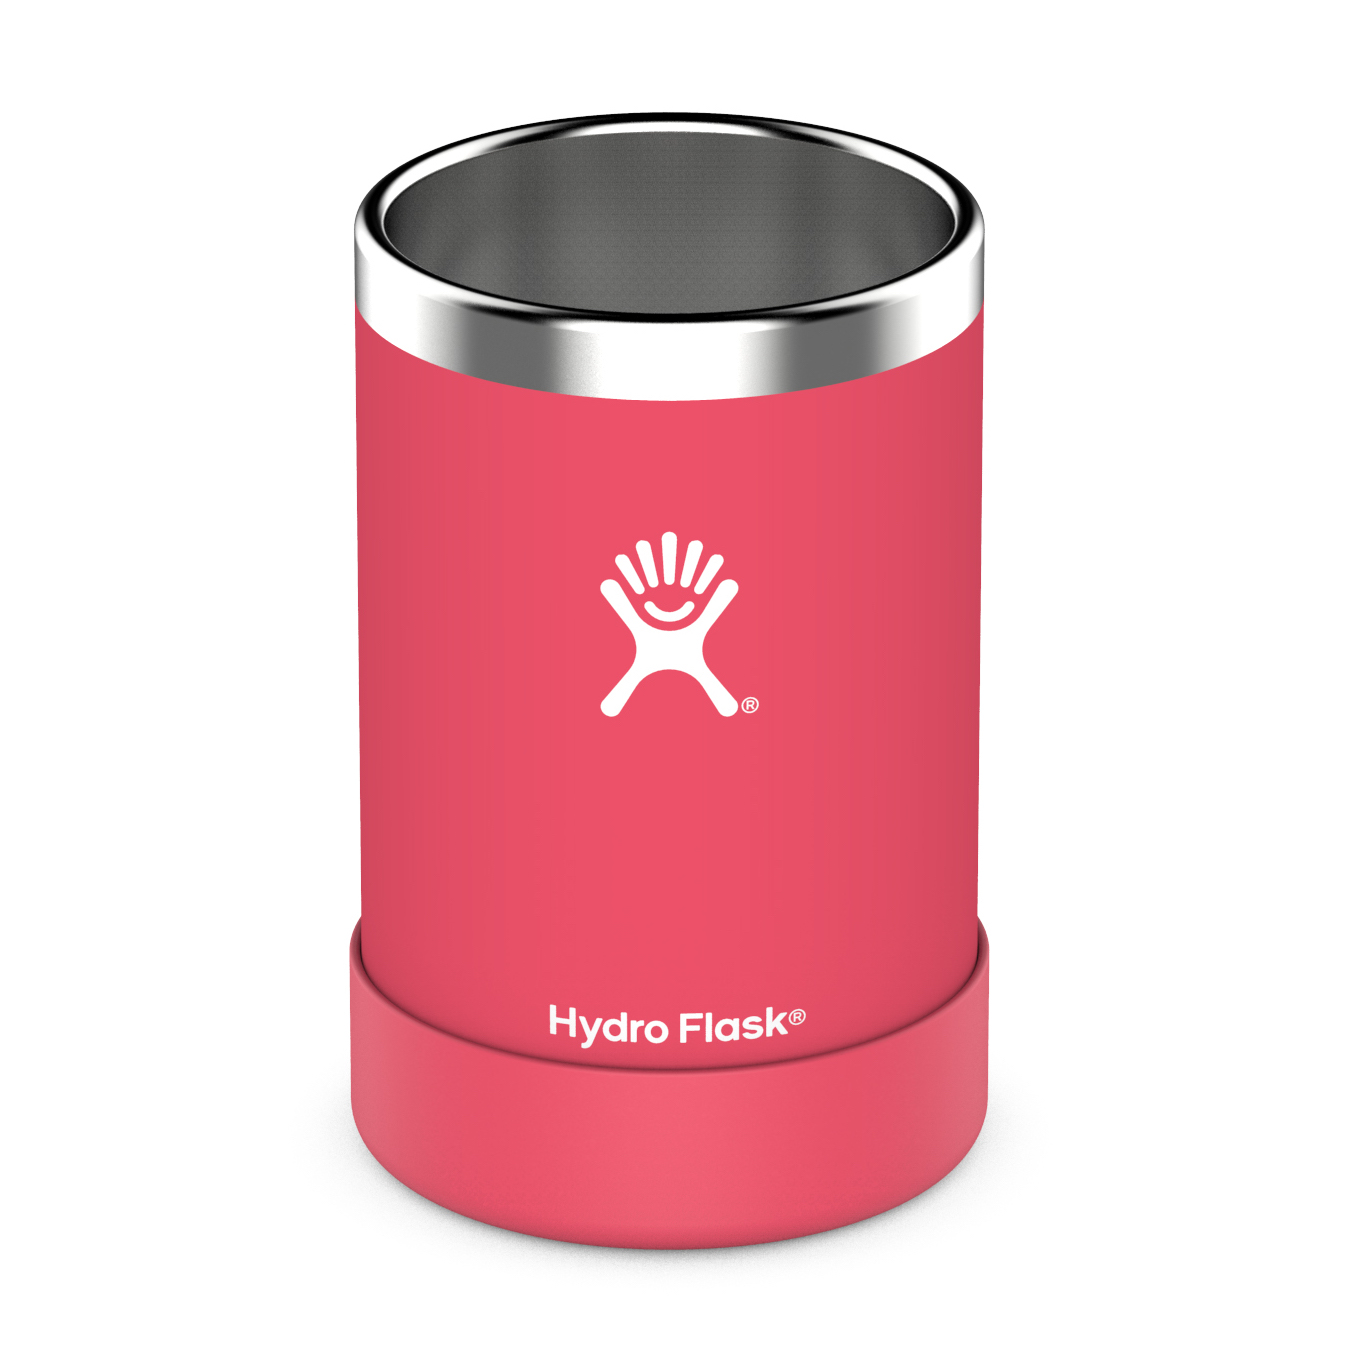 https://www.outdoorsportswire.com/wp-content/uploads/2018/07/2-HydroFlask-CoolerCup-Watermelon-Rendering-Spring2019.jpg